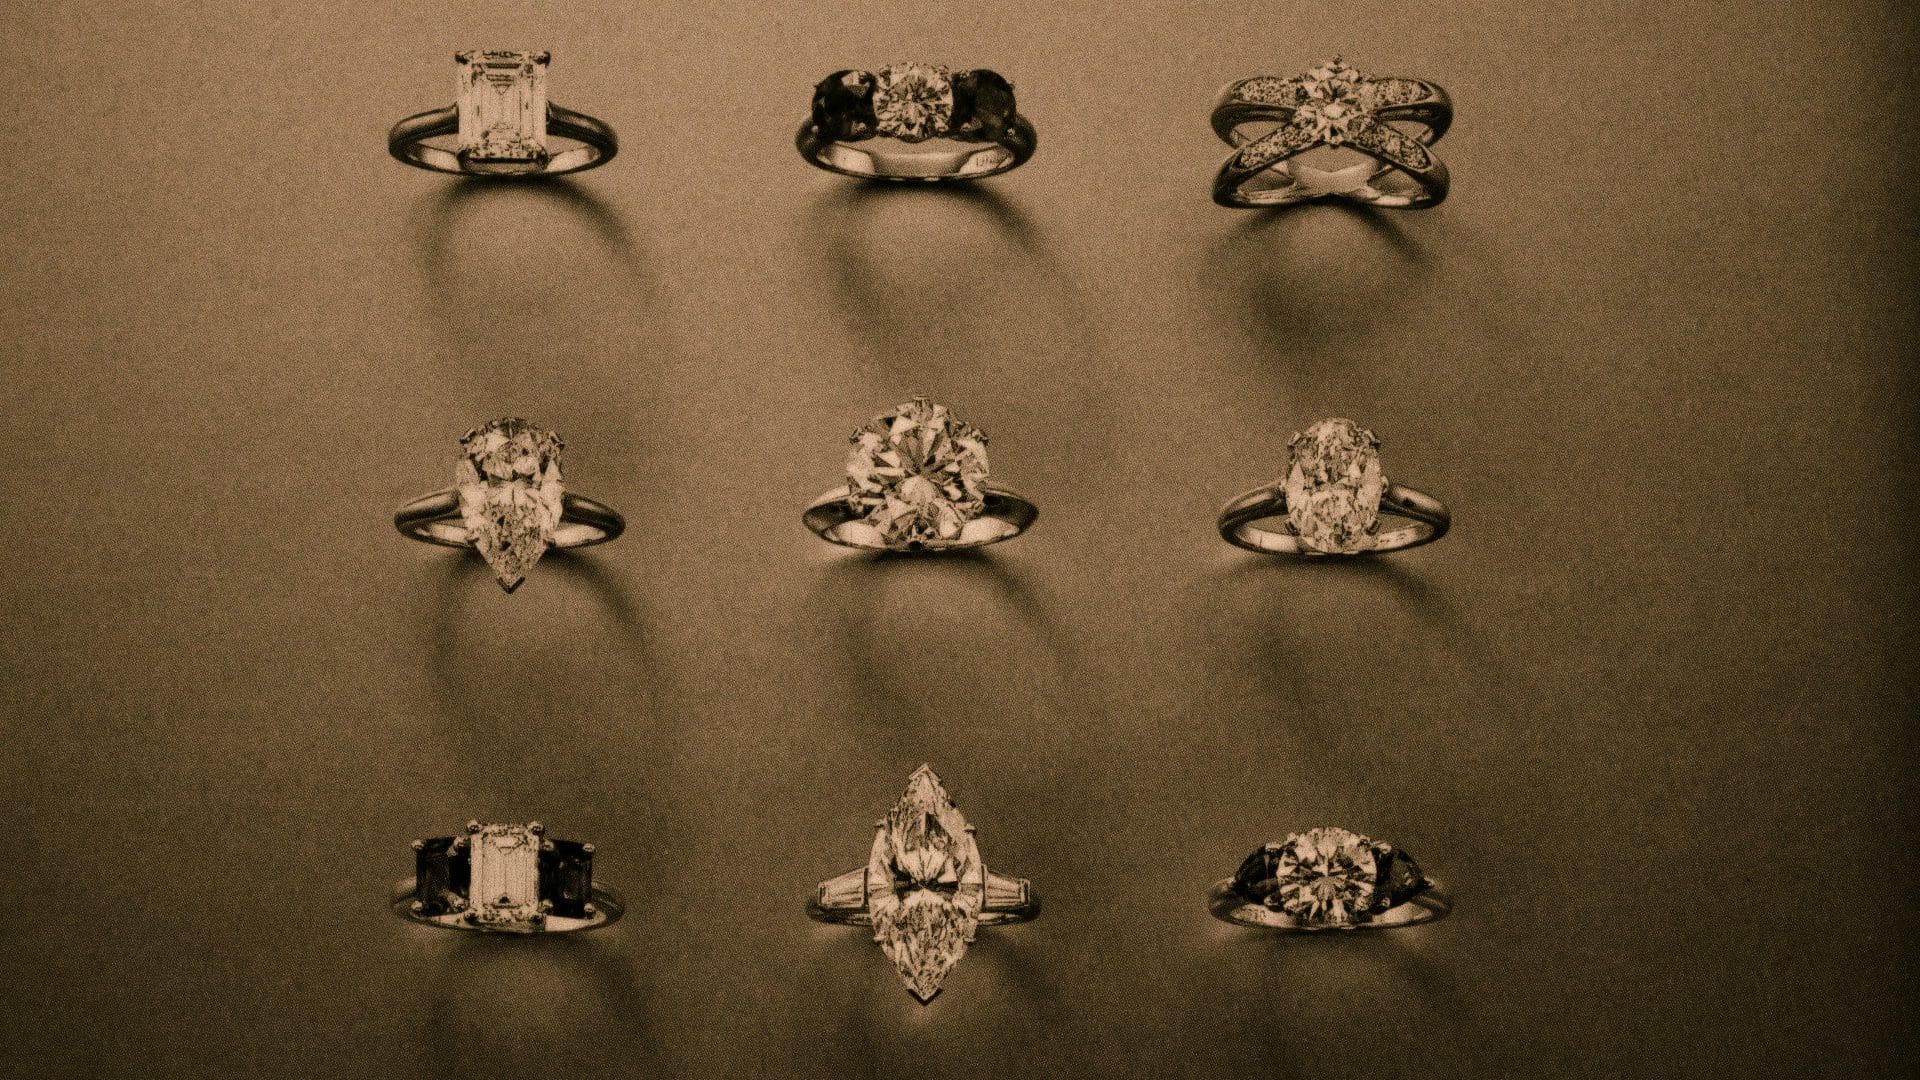 Sepia-toned image displaying a selection of nine Tiffany & Co. engagement rings, each featuring the revolutionary Tiffany setting that elevated diamond jewelry design, against a dark backdrop.